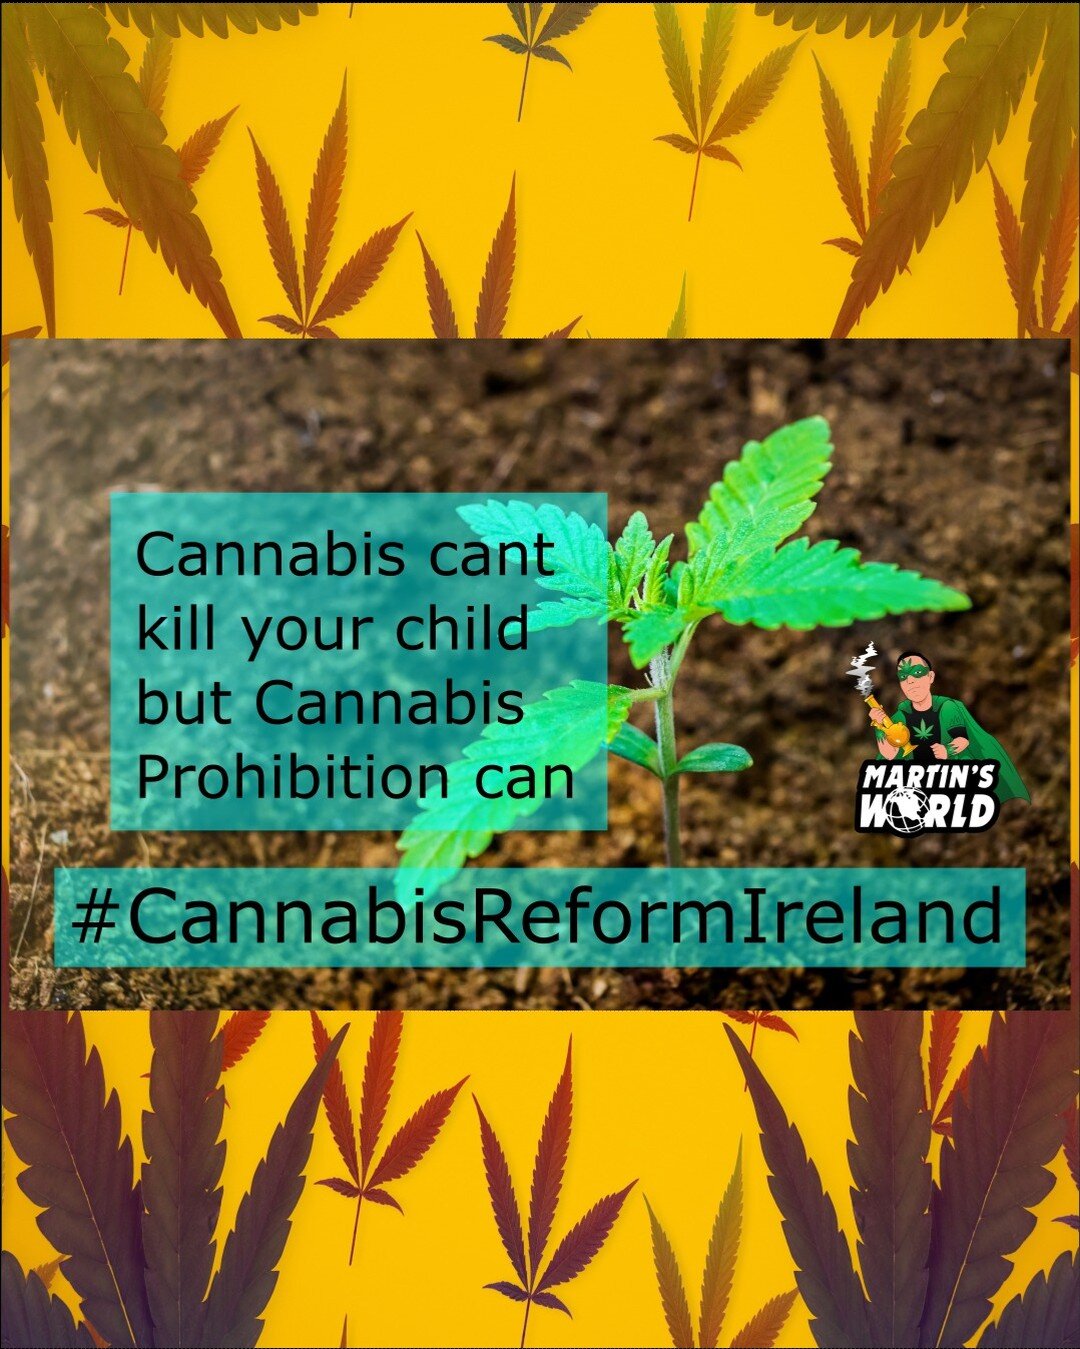 Its only a matter of time before someone's child dies here in Ireland due to Cannabis Prohibition.
(New Blog post, link in BIO)
The UK and European countries have already seen a number of deaths linked to the consumption of Synthetic Cannabinoids, wh